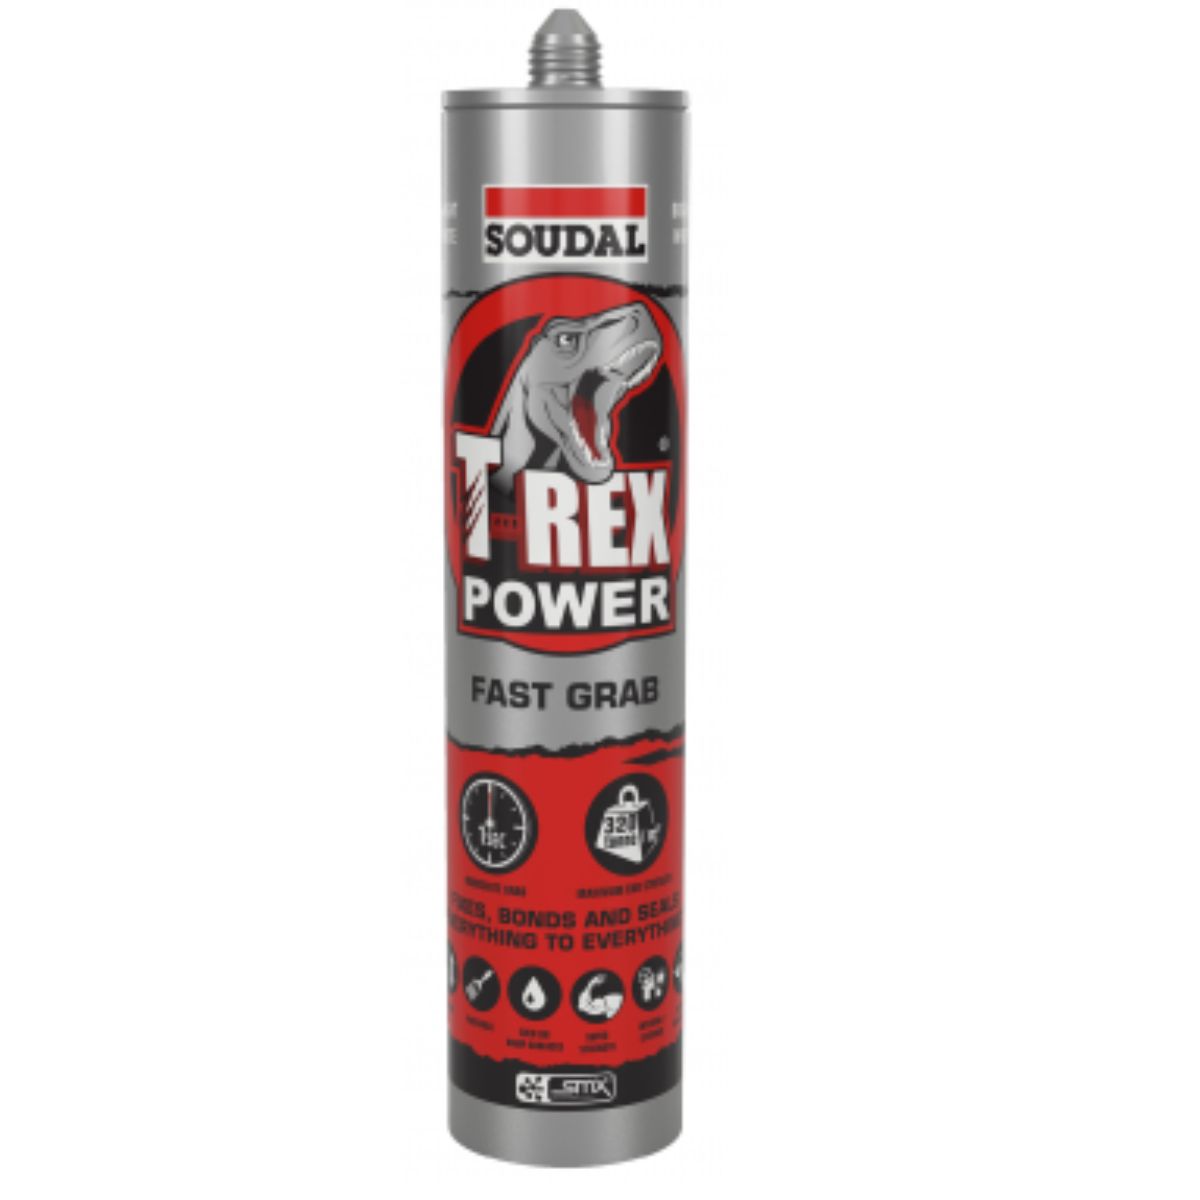 Soudal 121968 T-Rex Power Fast Grab 290ml SMX® Polymer Sealant Adhesive Bright White One Box (12 Pack) 101753×12 - South East Clearance Centre